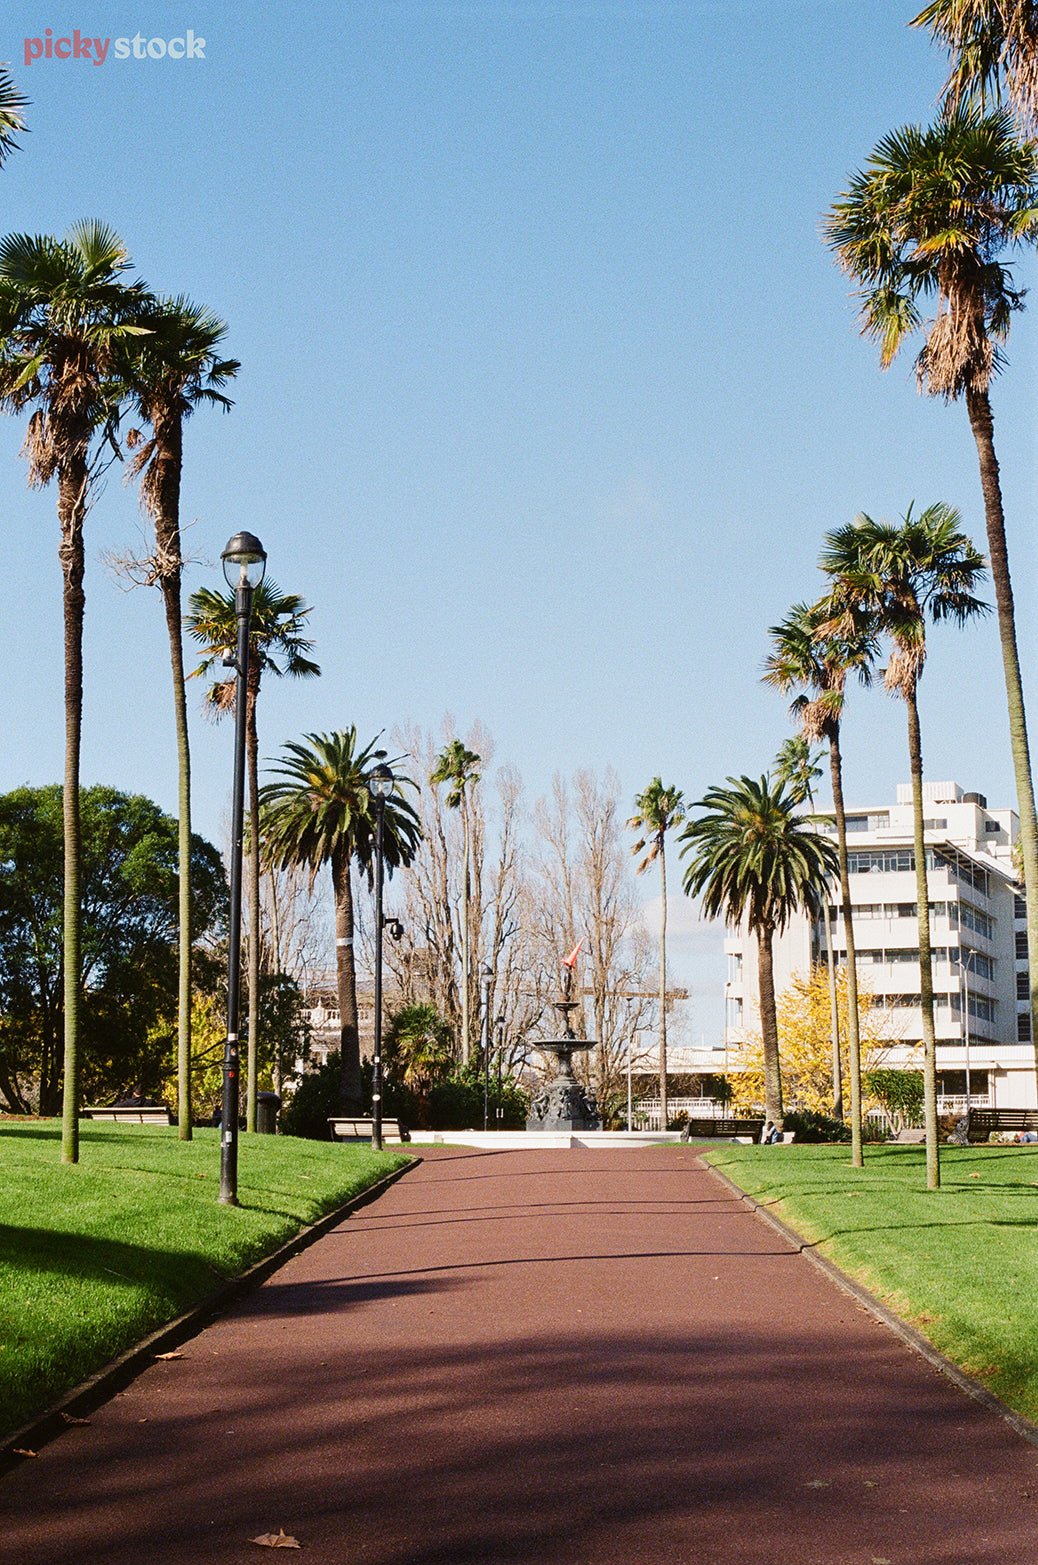 Looking up the red ashfelt towards a circular art deco fountain. The path is lined by pheonix palm trees and the sky is bright blue with no clouds. 